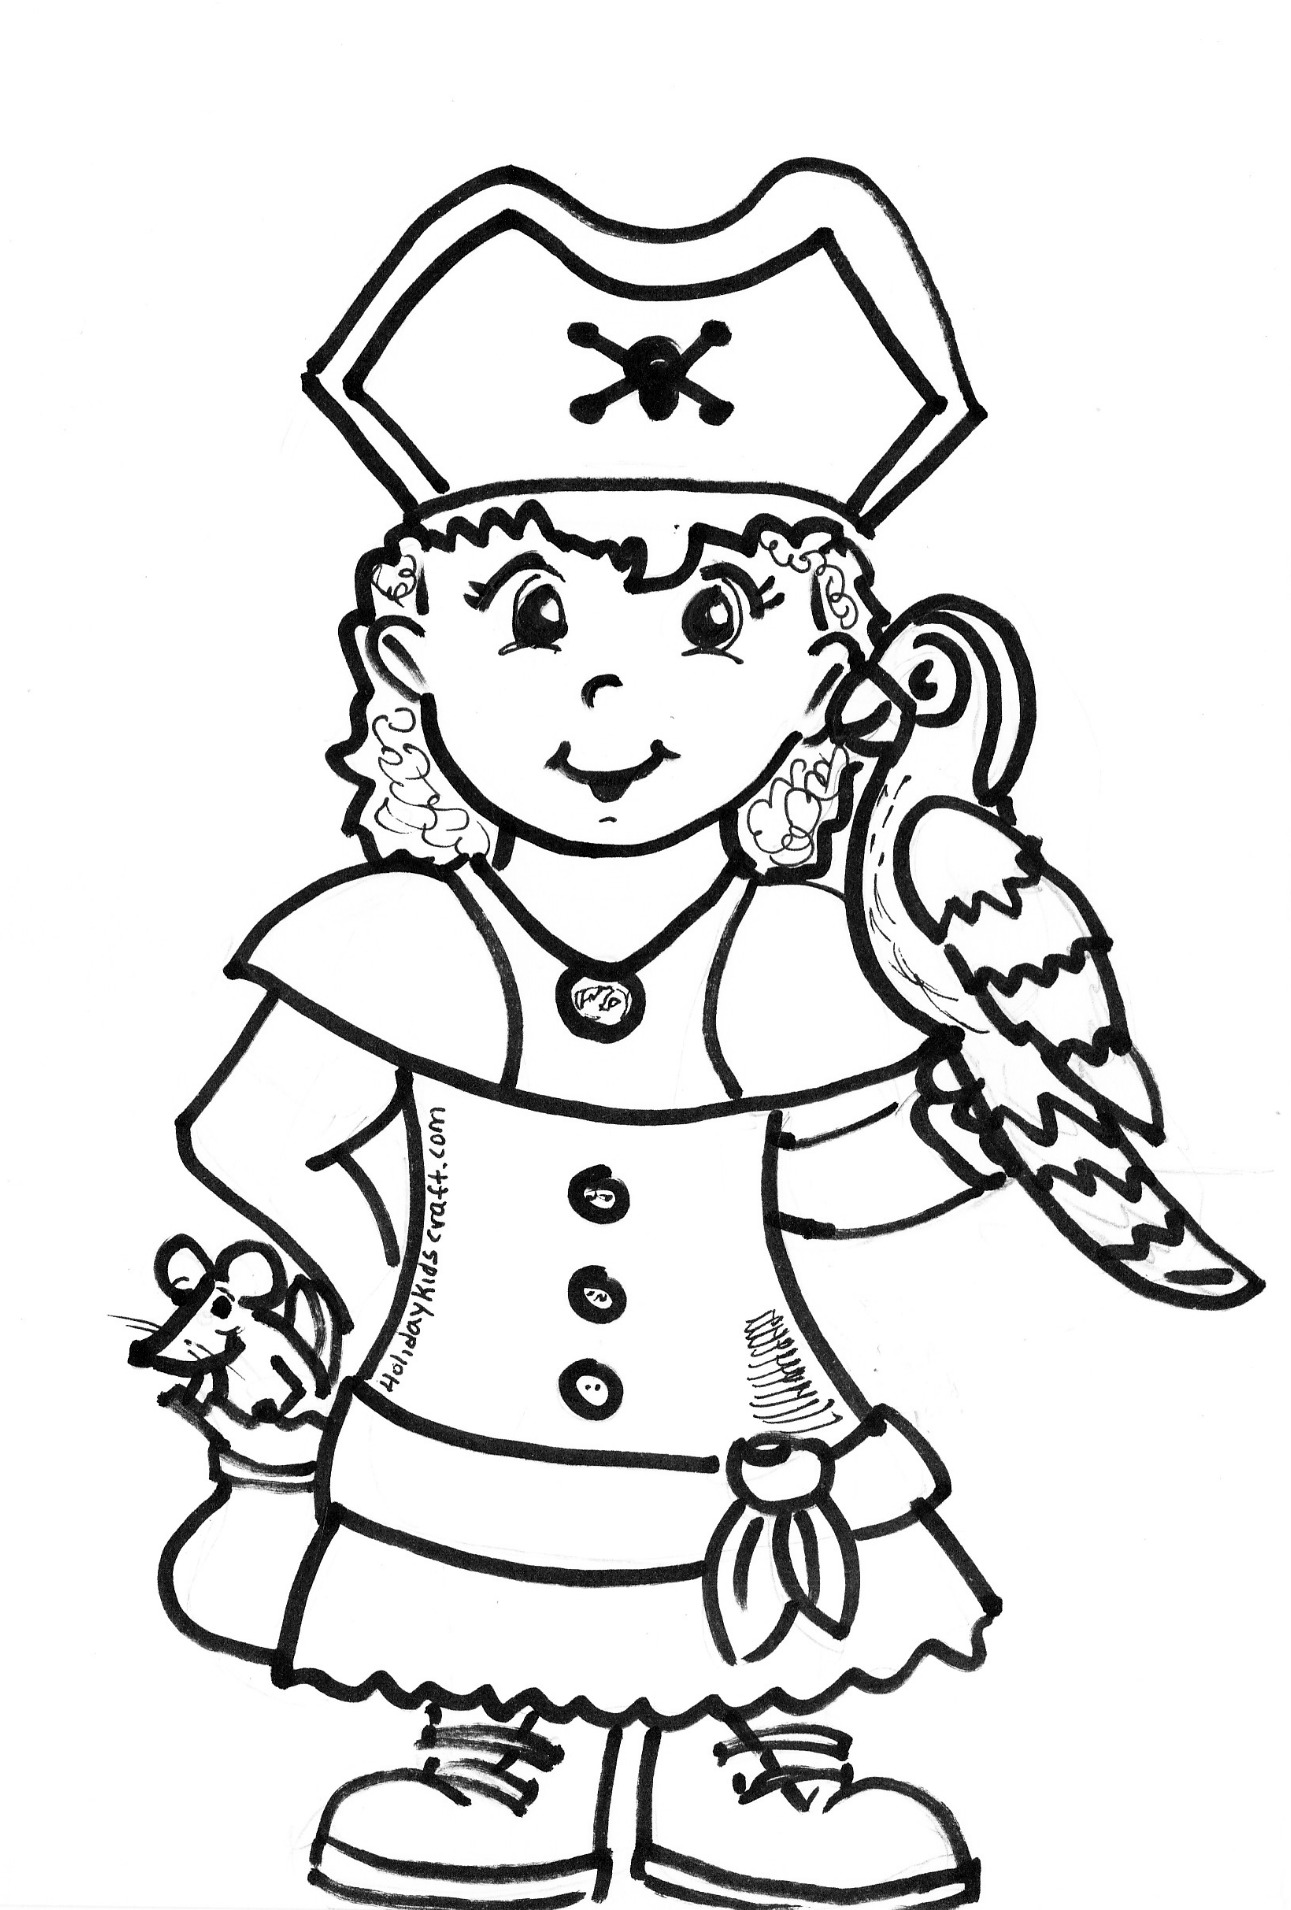 Coloring page: Pirate (Characters) #105006 - Free Printable Coloring Pages